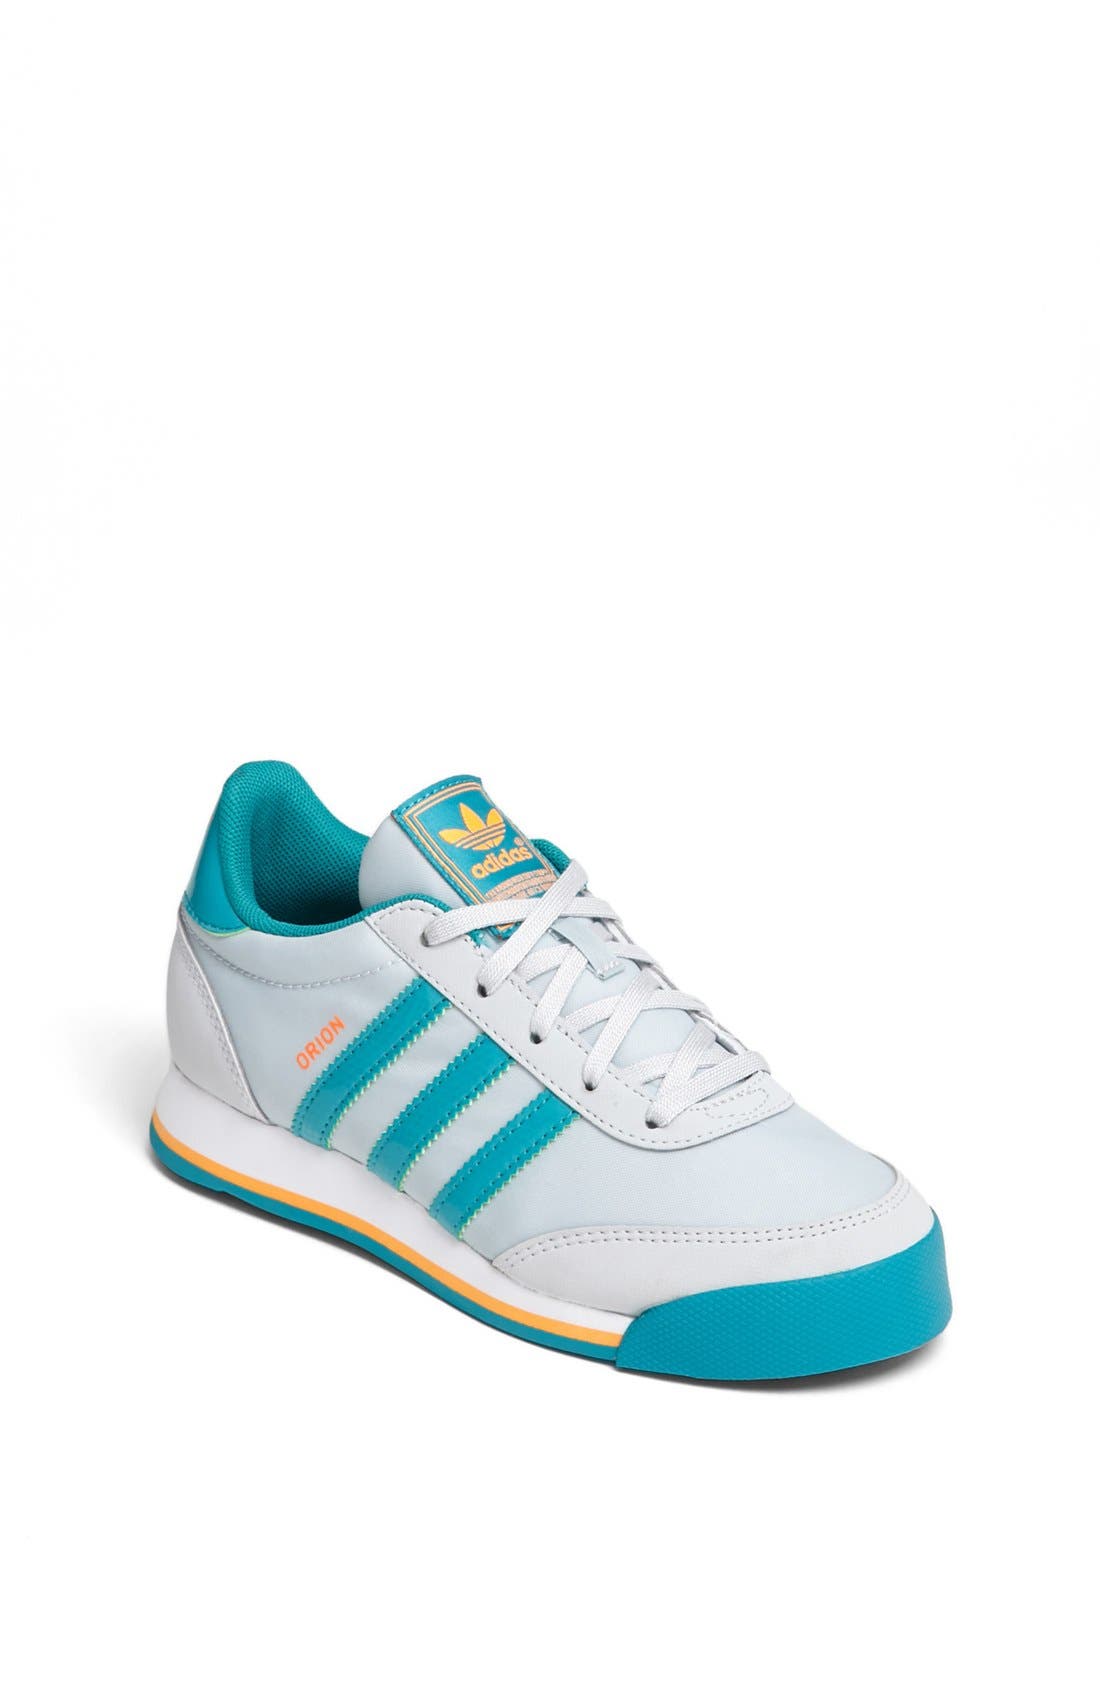 adidas orion shoes